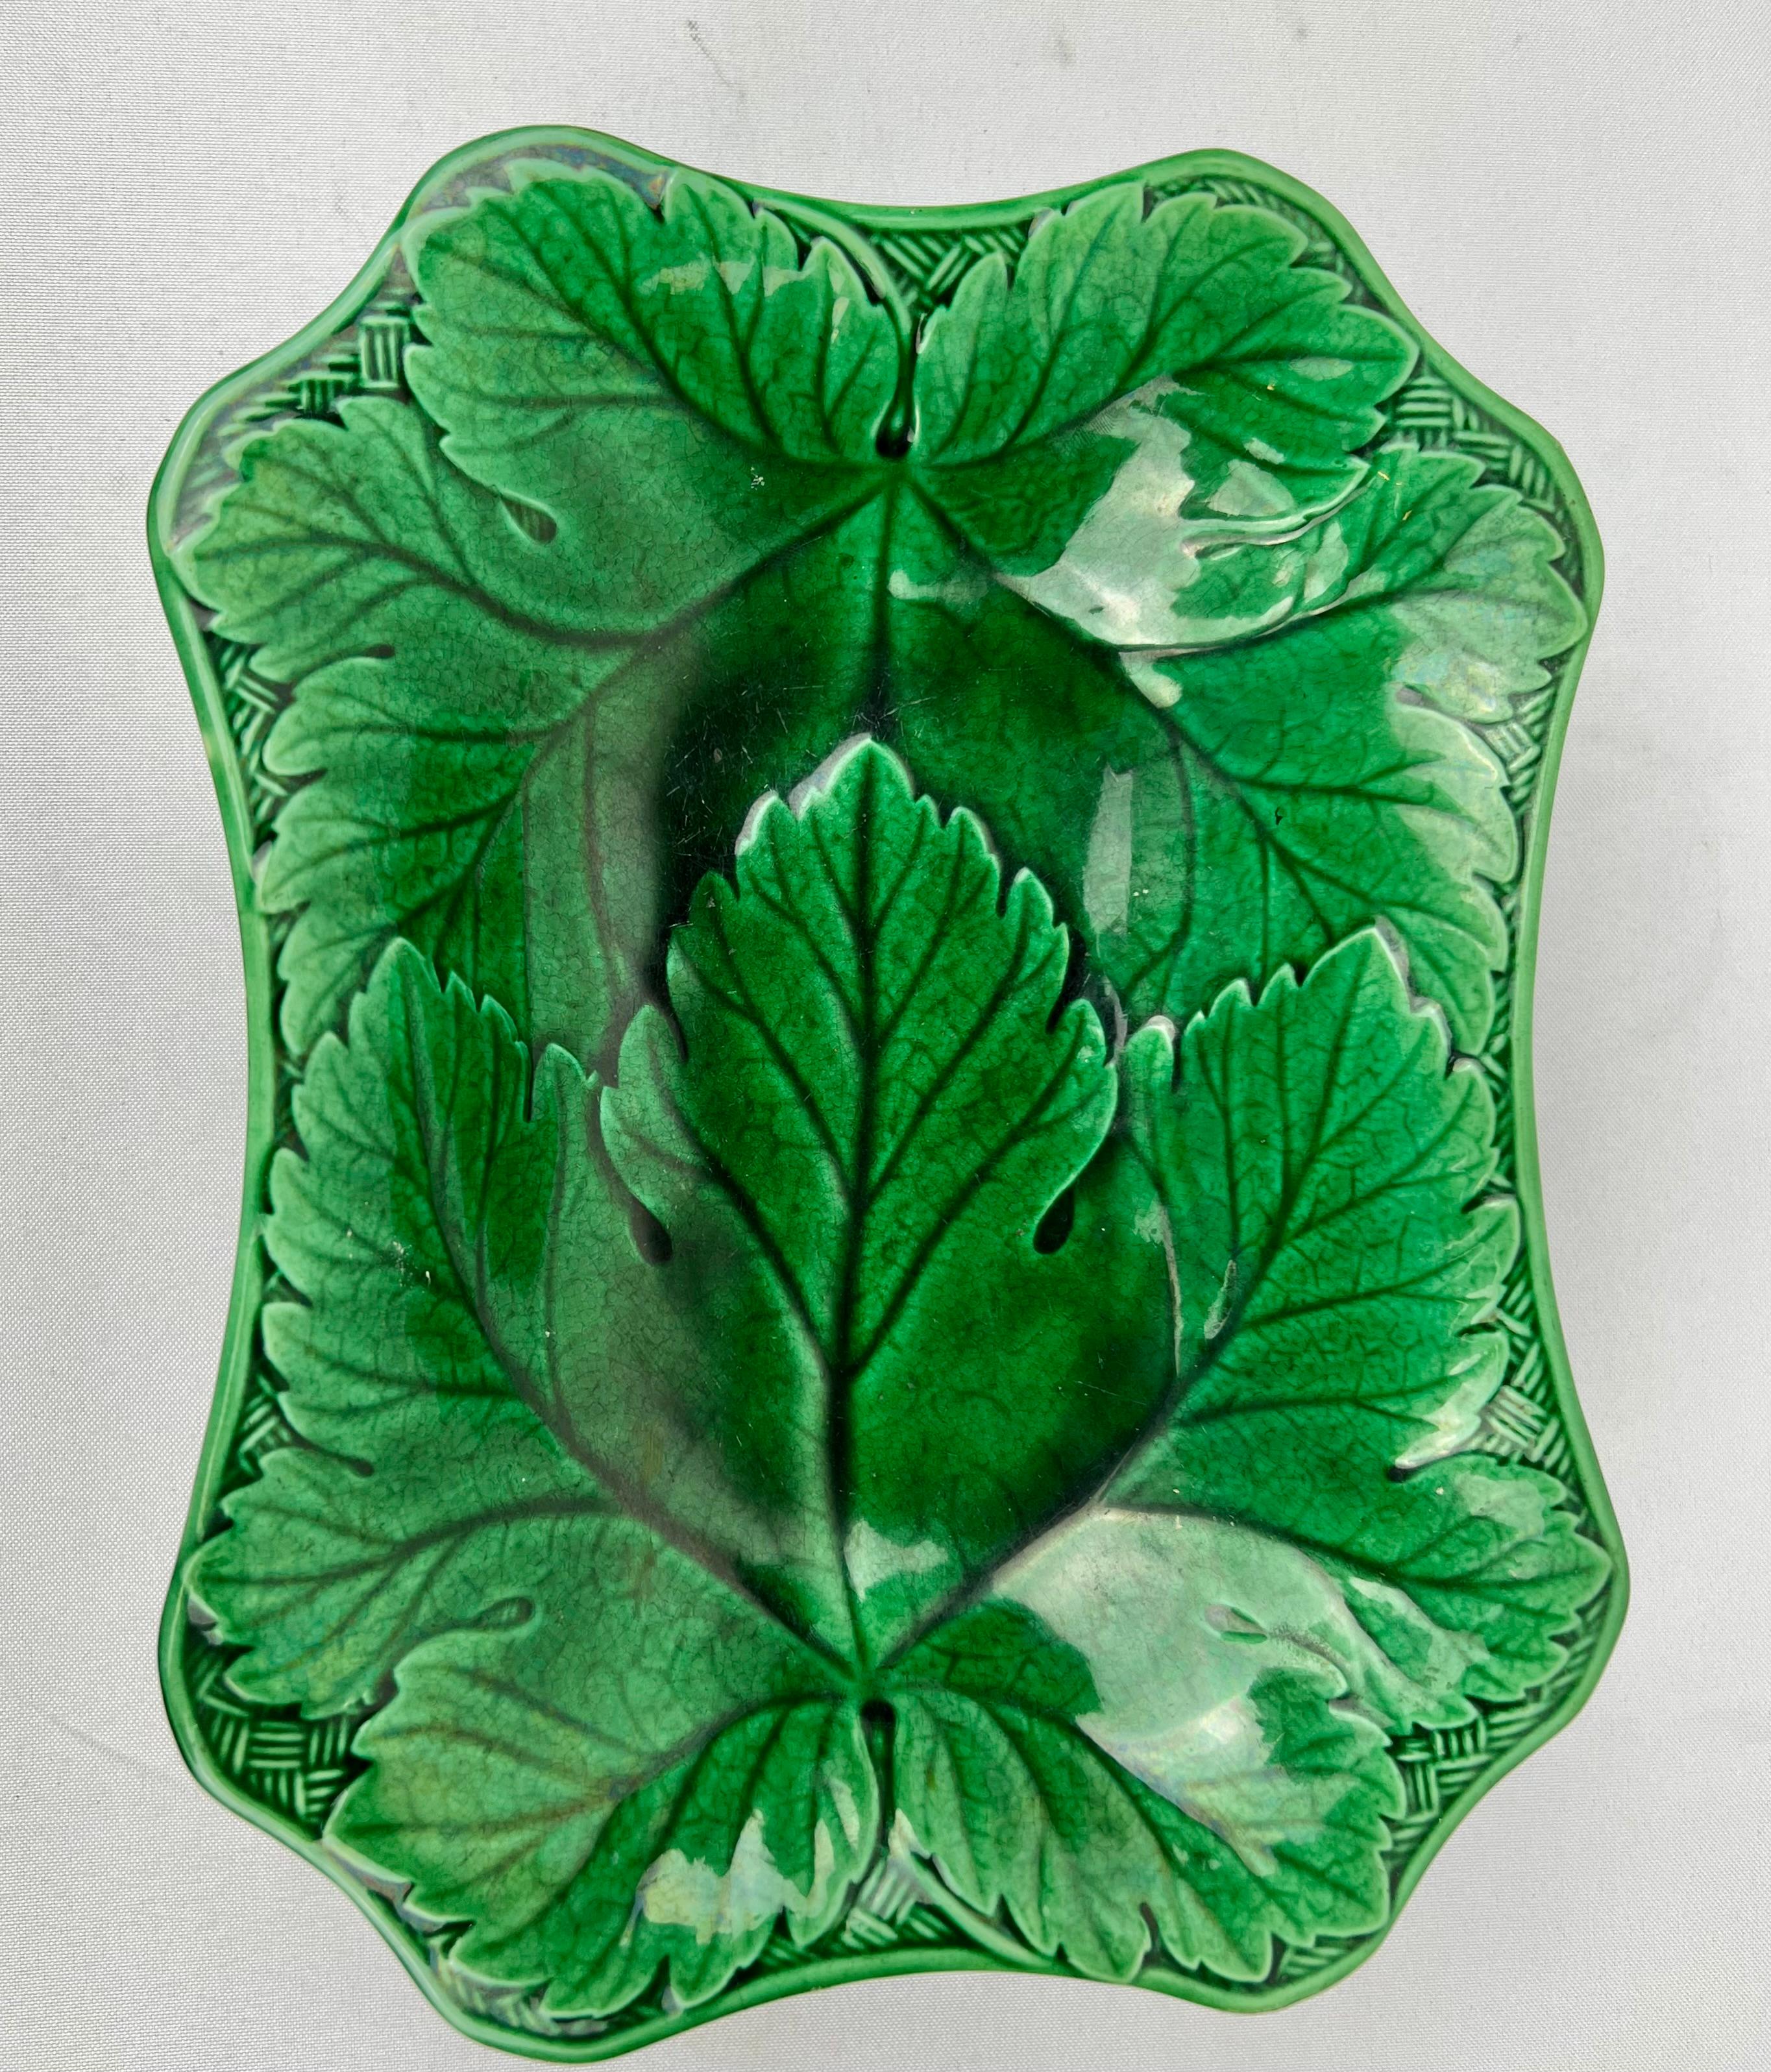 Gorgeous Ming green Wedgwood majolica leaf motif footed serving dish . This beautiful green which Wedgwood made so famous looks great as a display piece and even better with food on it. Created during the Victorian period in England and its